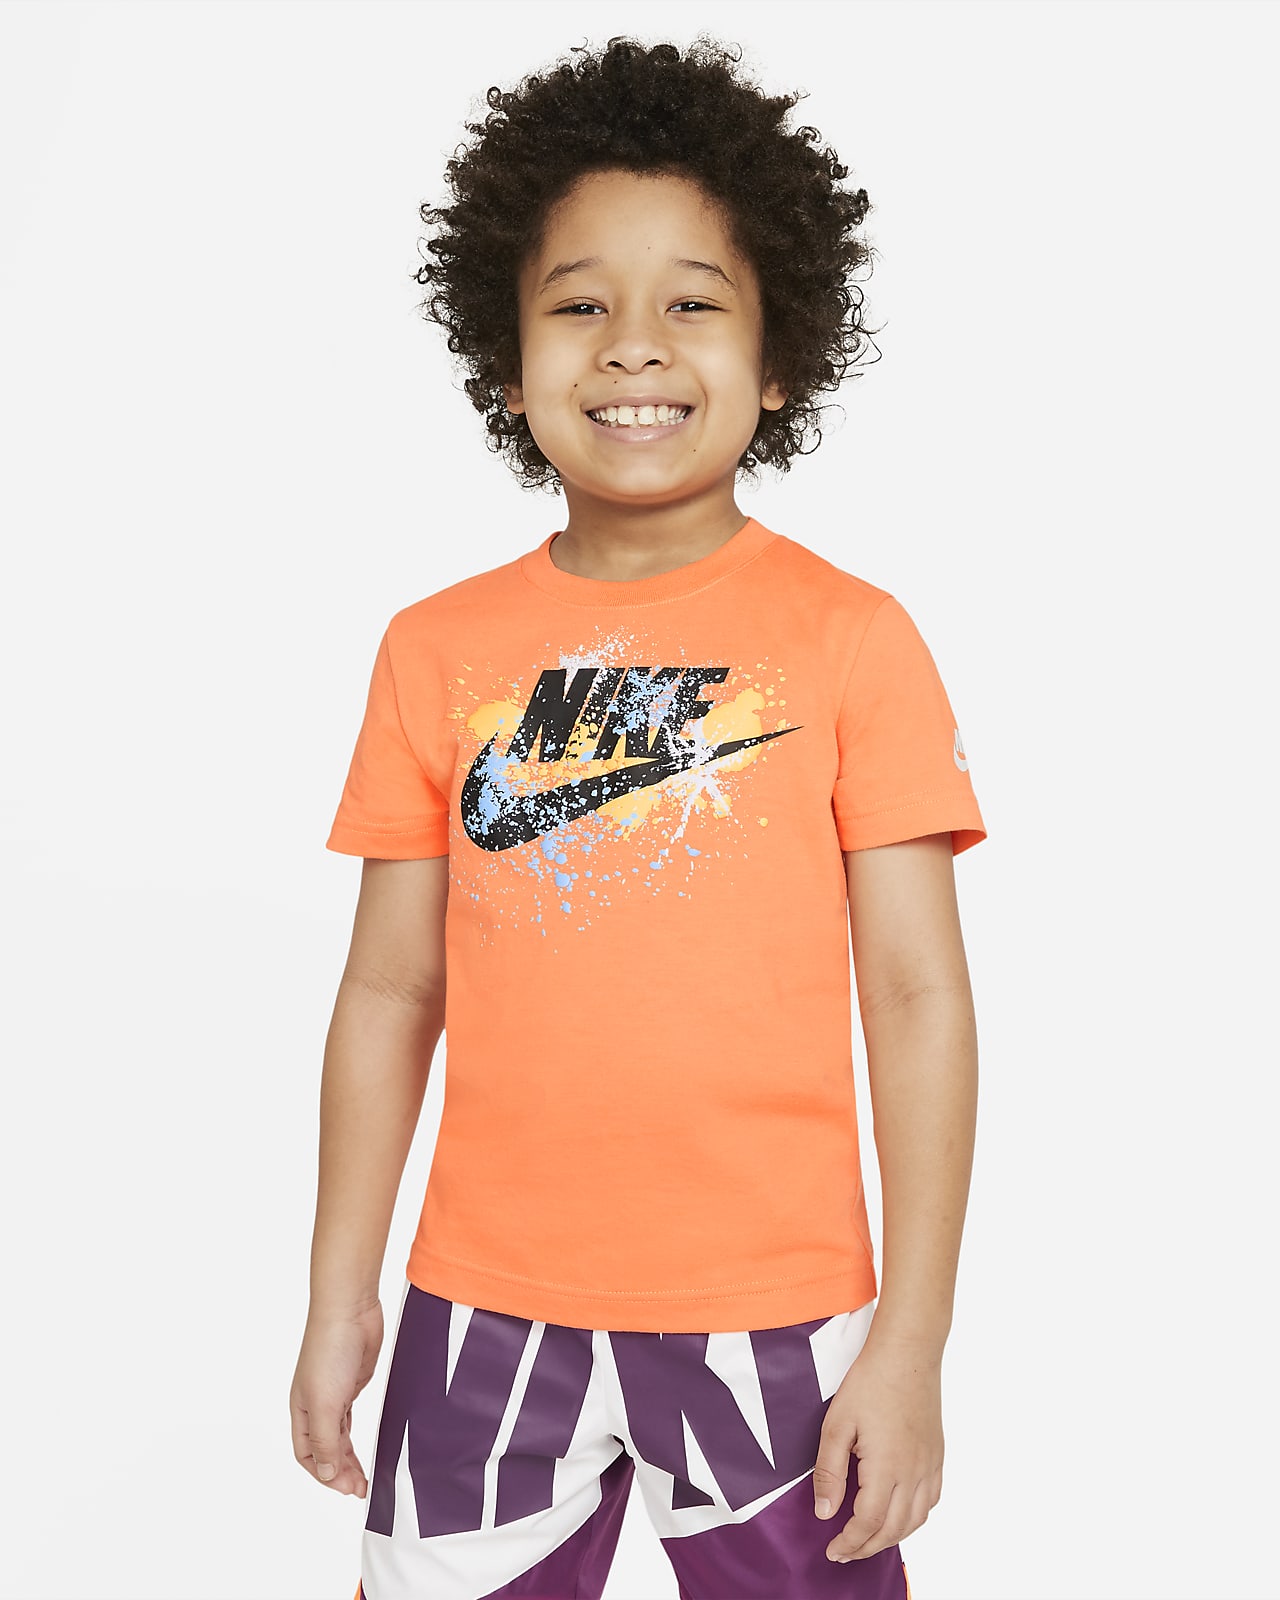 Buy > childrens nike shorts and t shirt > in stock